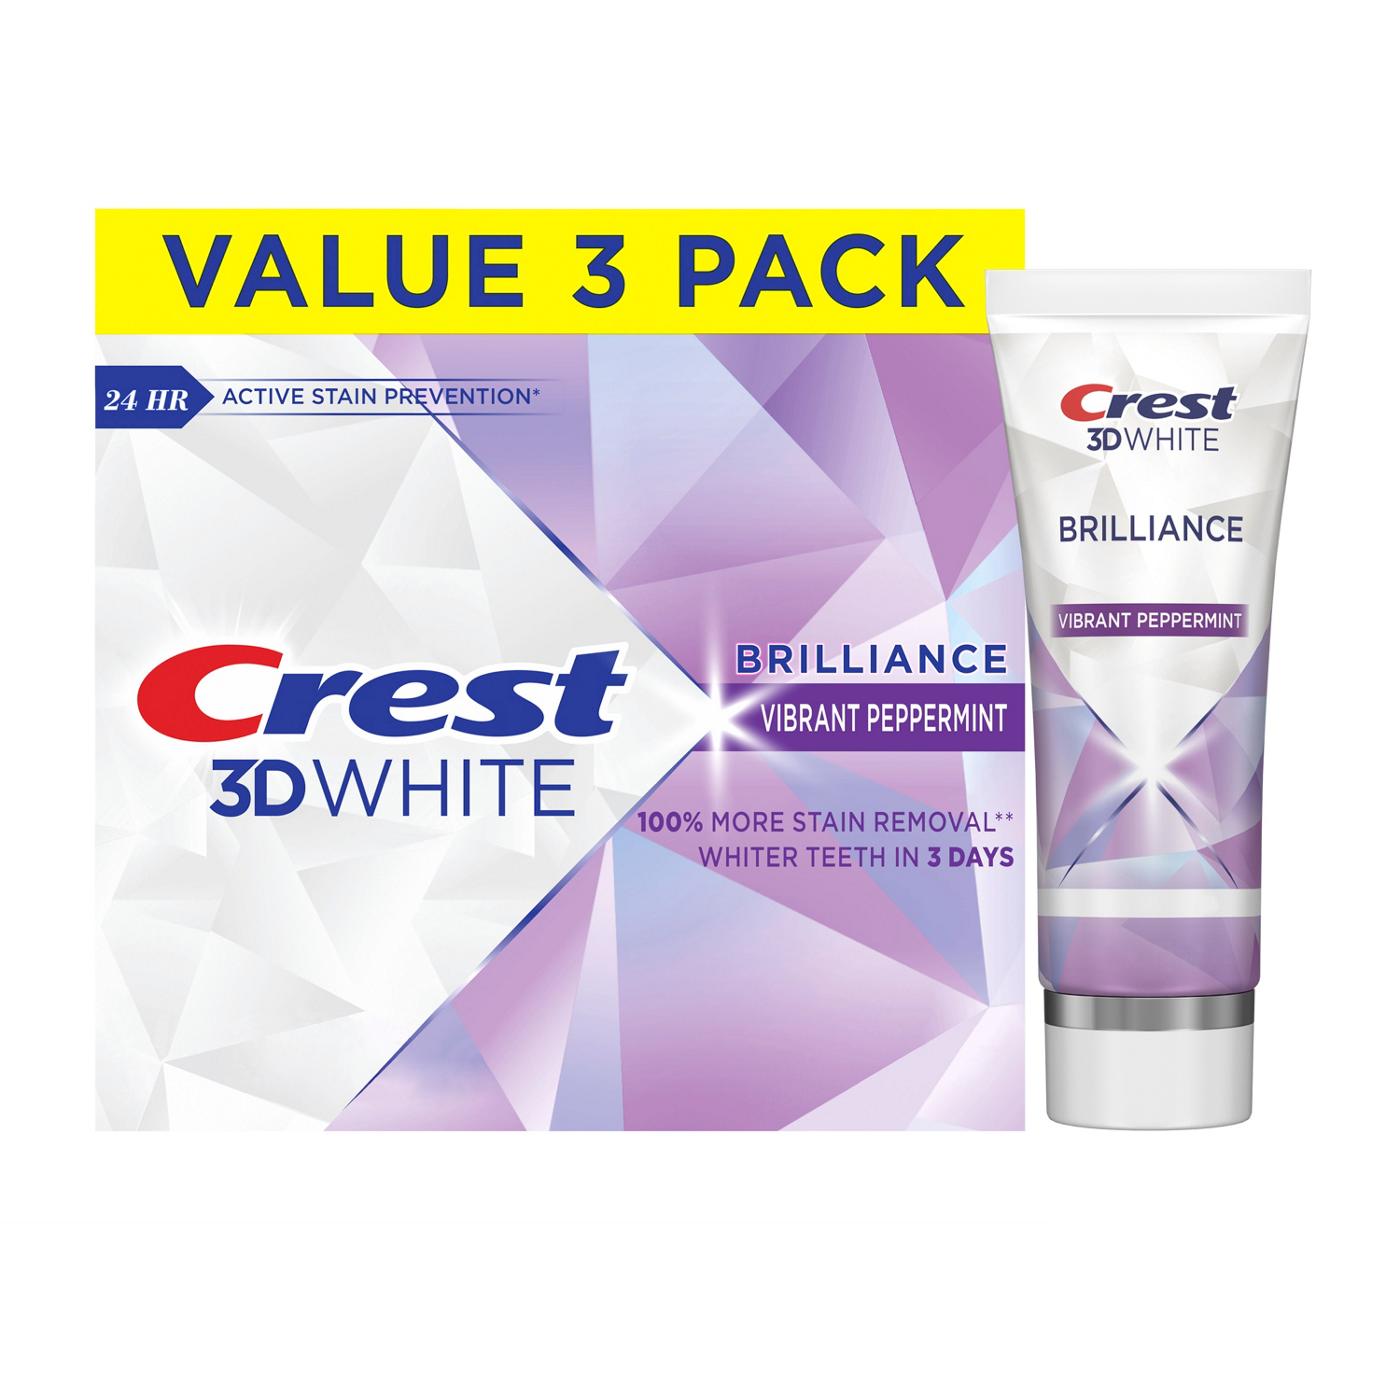 Crest 3D White Toothpaste Brilliance - Peppermint; image 7 of 8